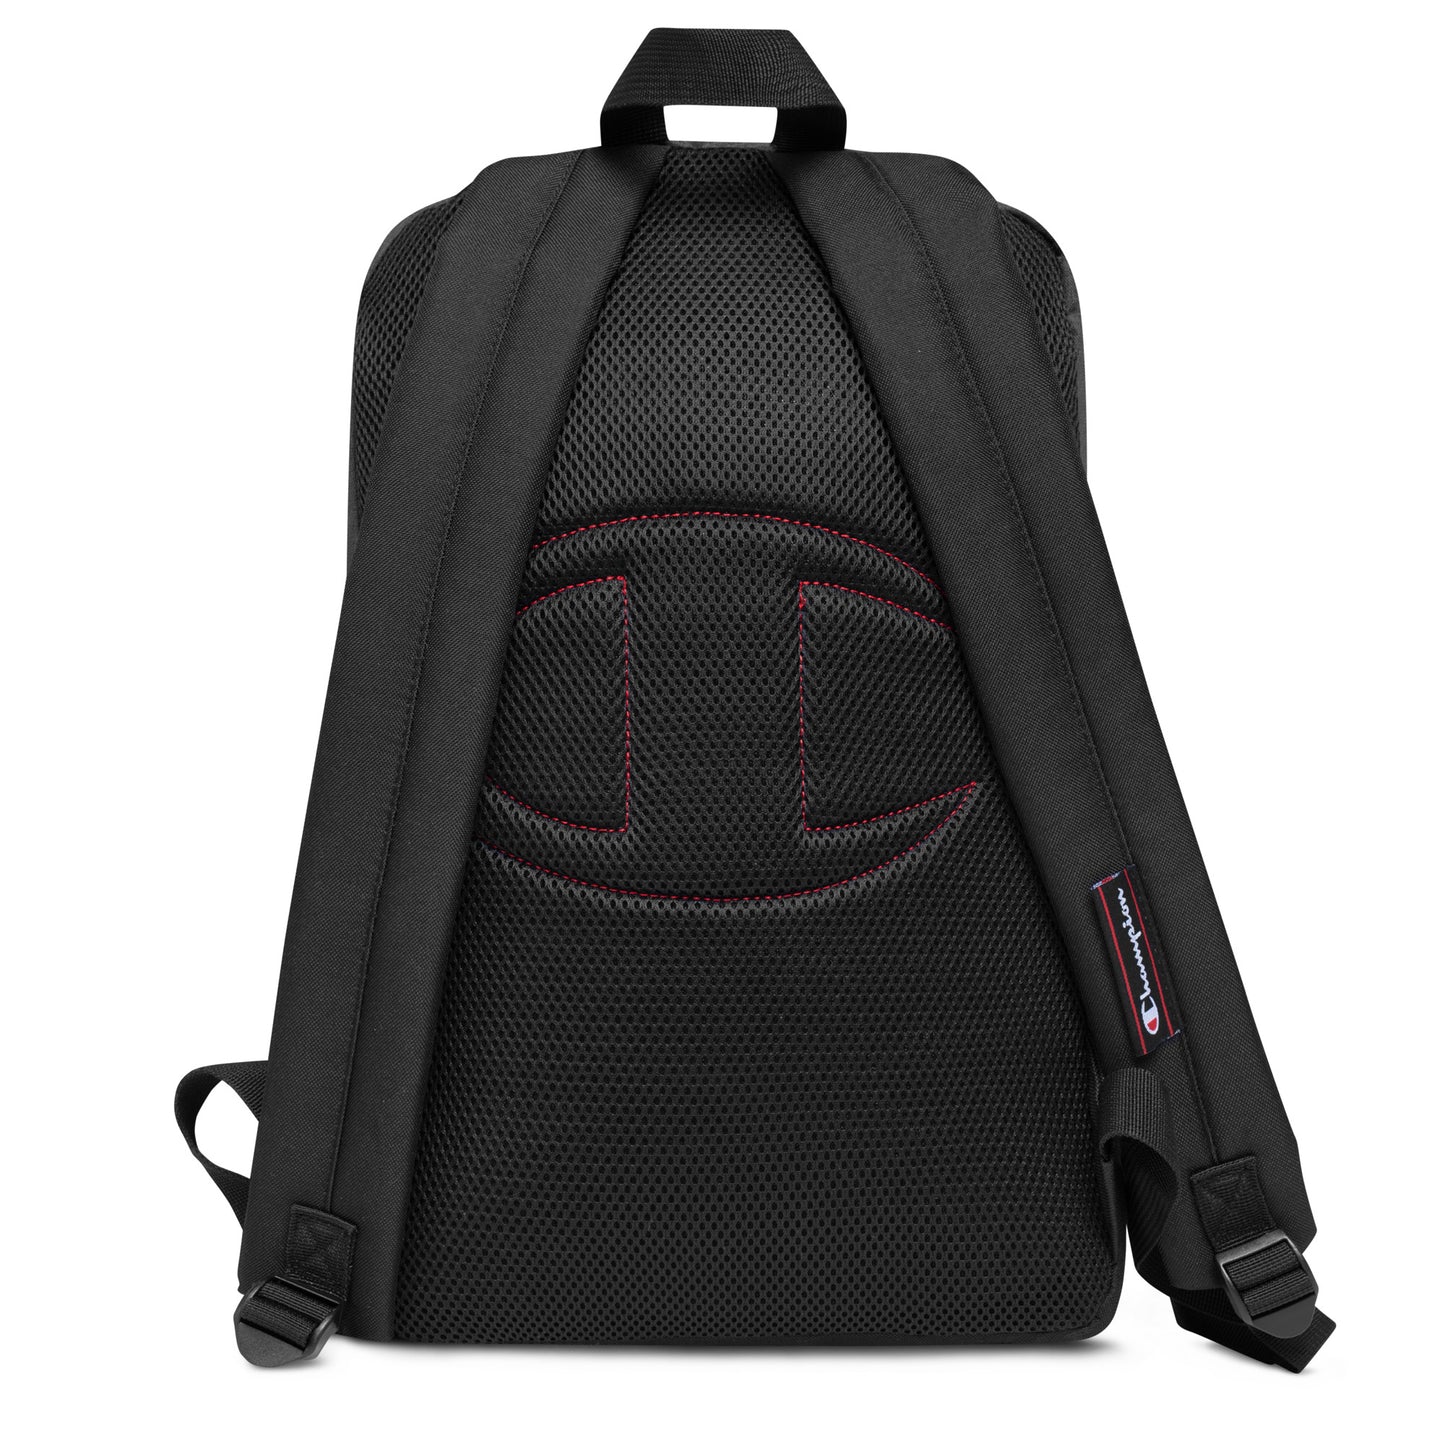 High Quality Embroidered Champion Slammed Impulse Backpack